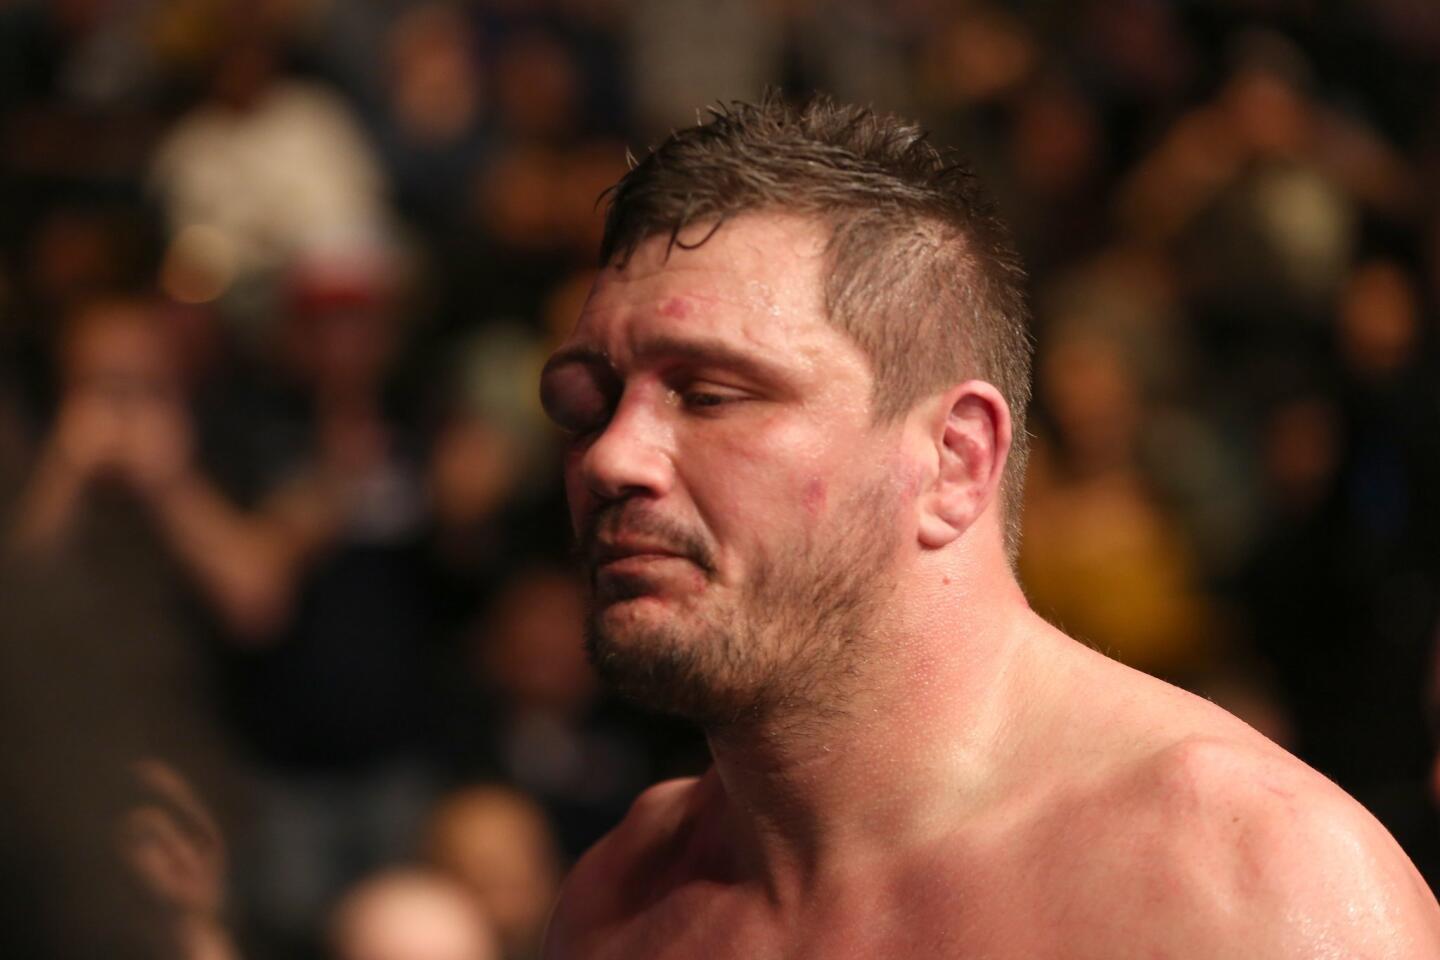 Matt Mitrione's damaged eye is seen after his bout with Travis Browne walking back to the dressing room after their mixed martial arts bout at UFC Fight Night 81, Sunday, Jan. 2, 2016, in Boston. Browne won via third round TKO. (AP Photo/Gregory Payan)